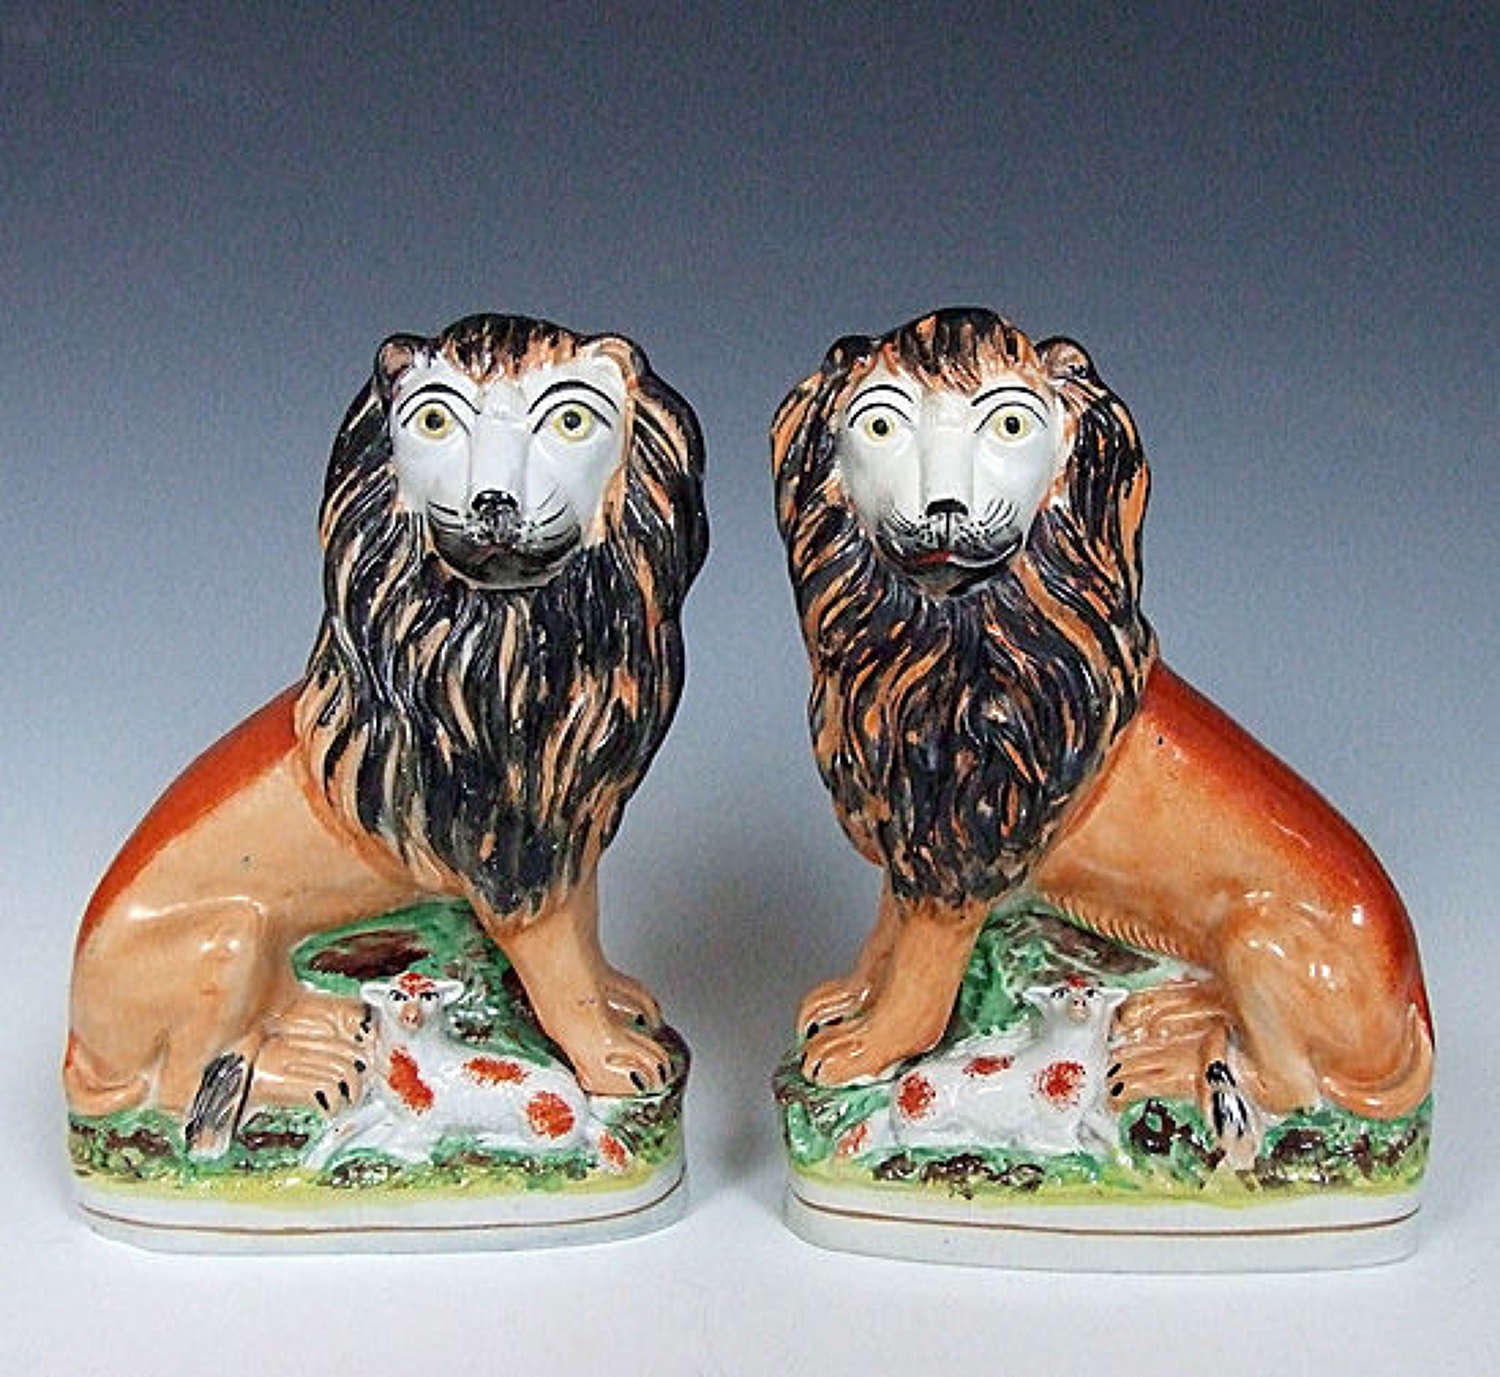 An extremely rare pair of Staffordshire lion & lamb figures